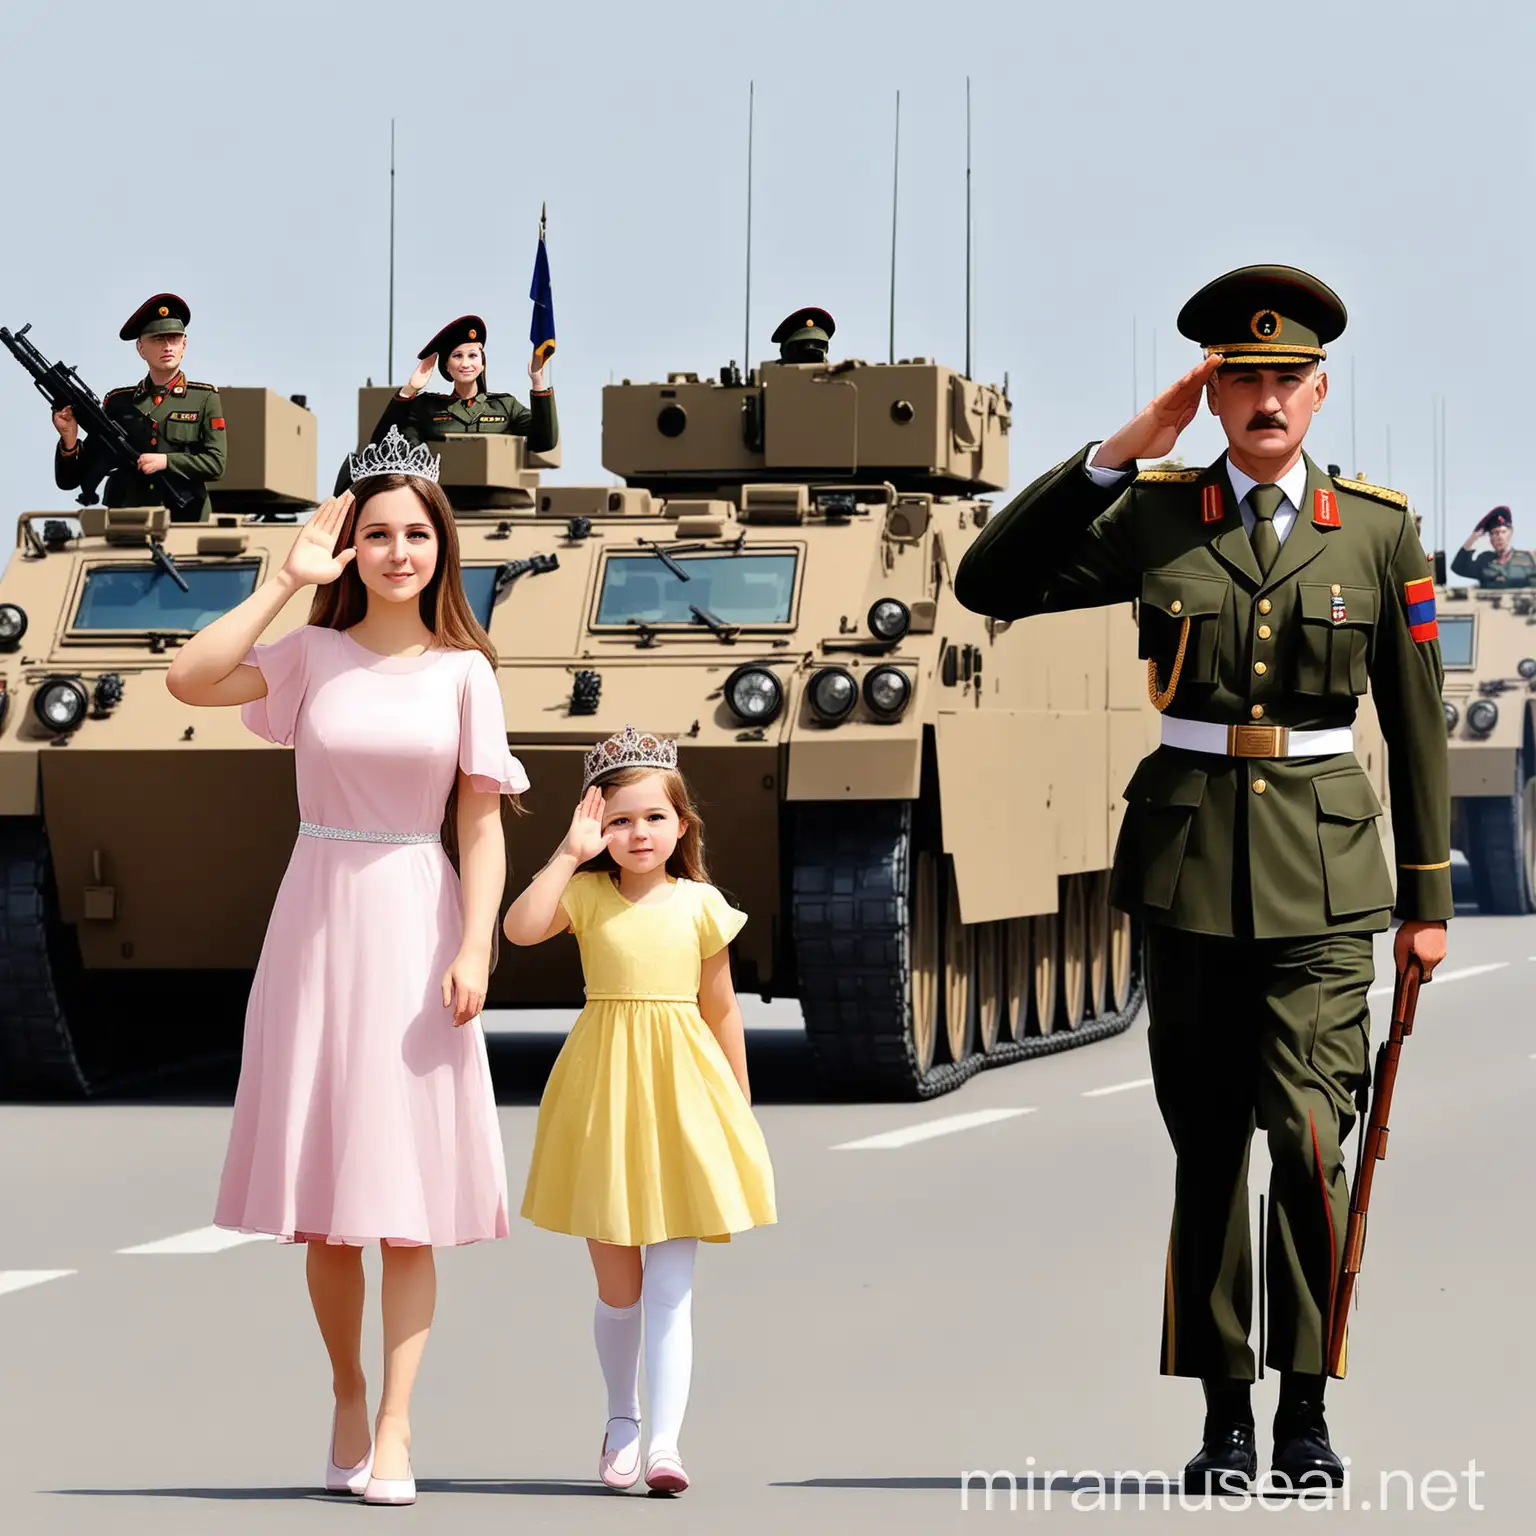 Royal Mother and Daughter Approaching as Soldiers Salute